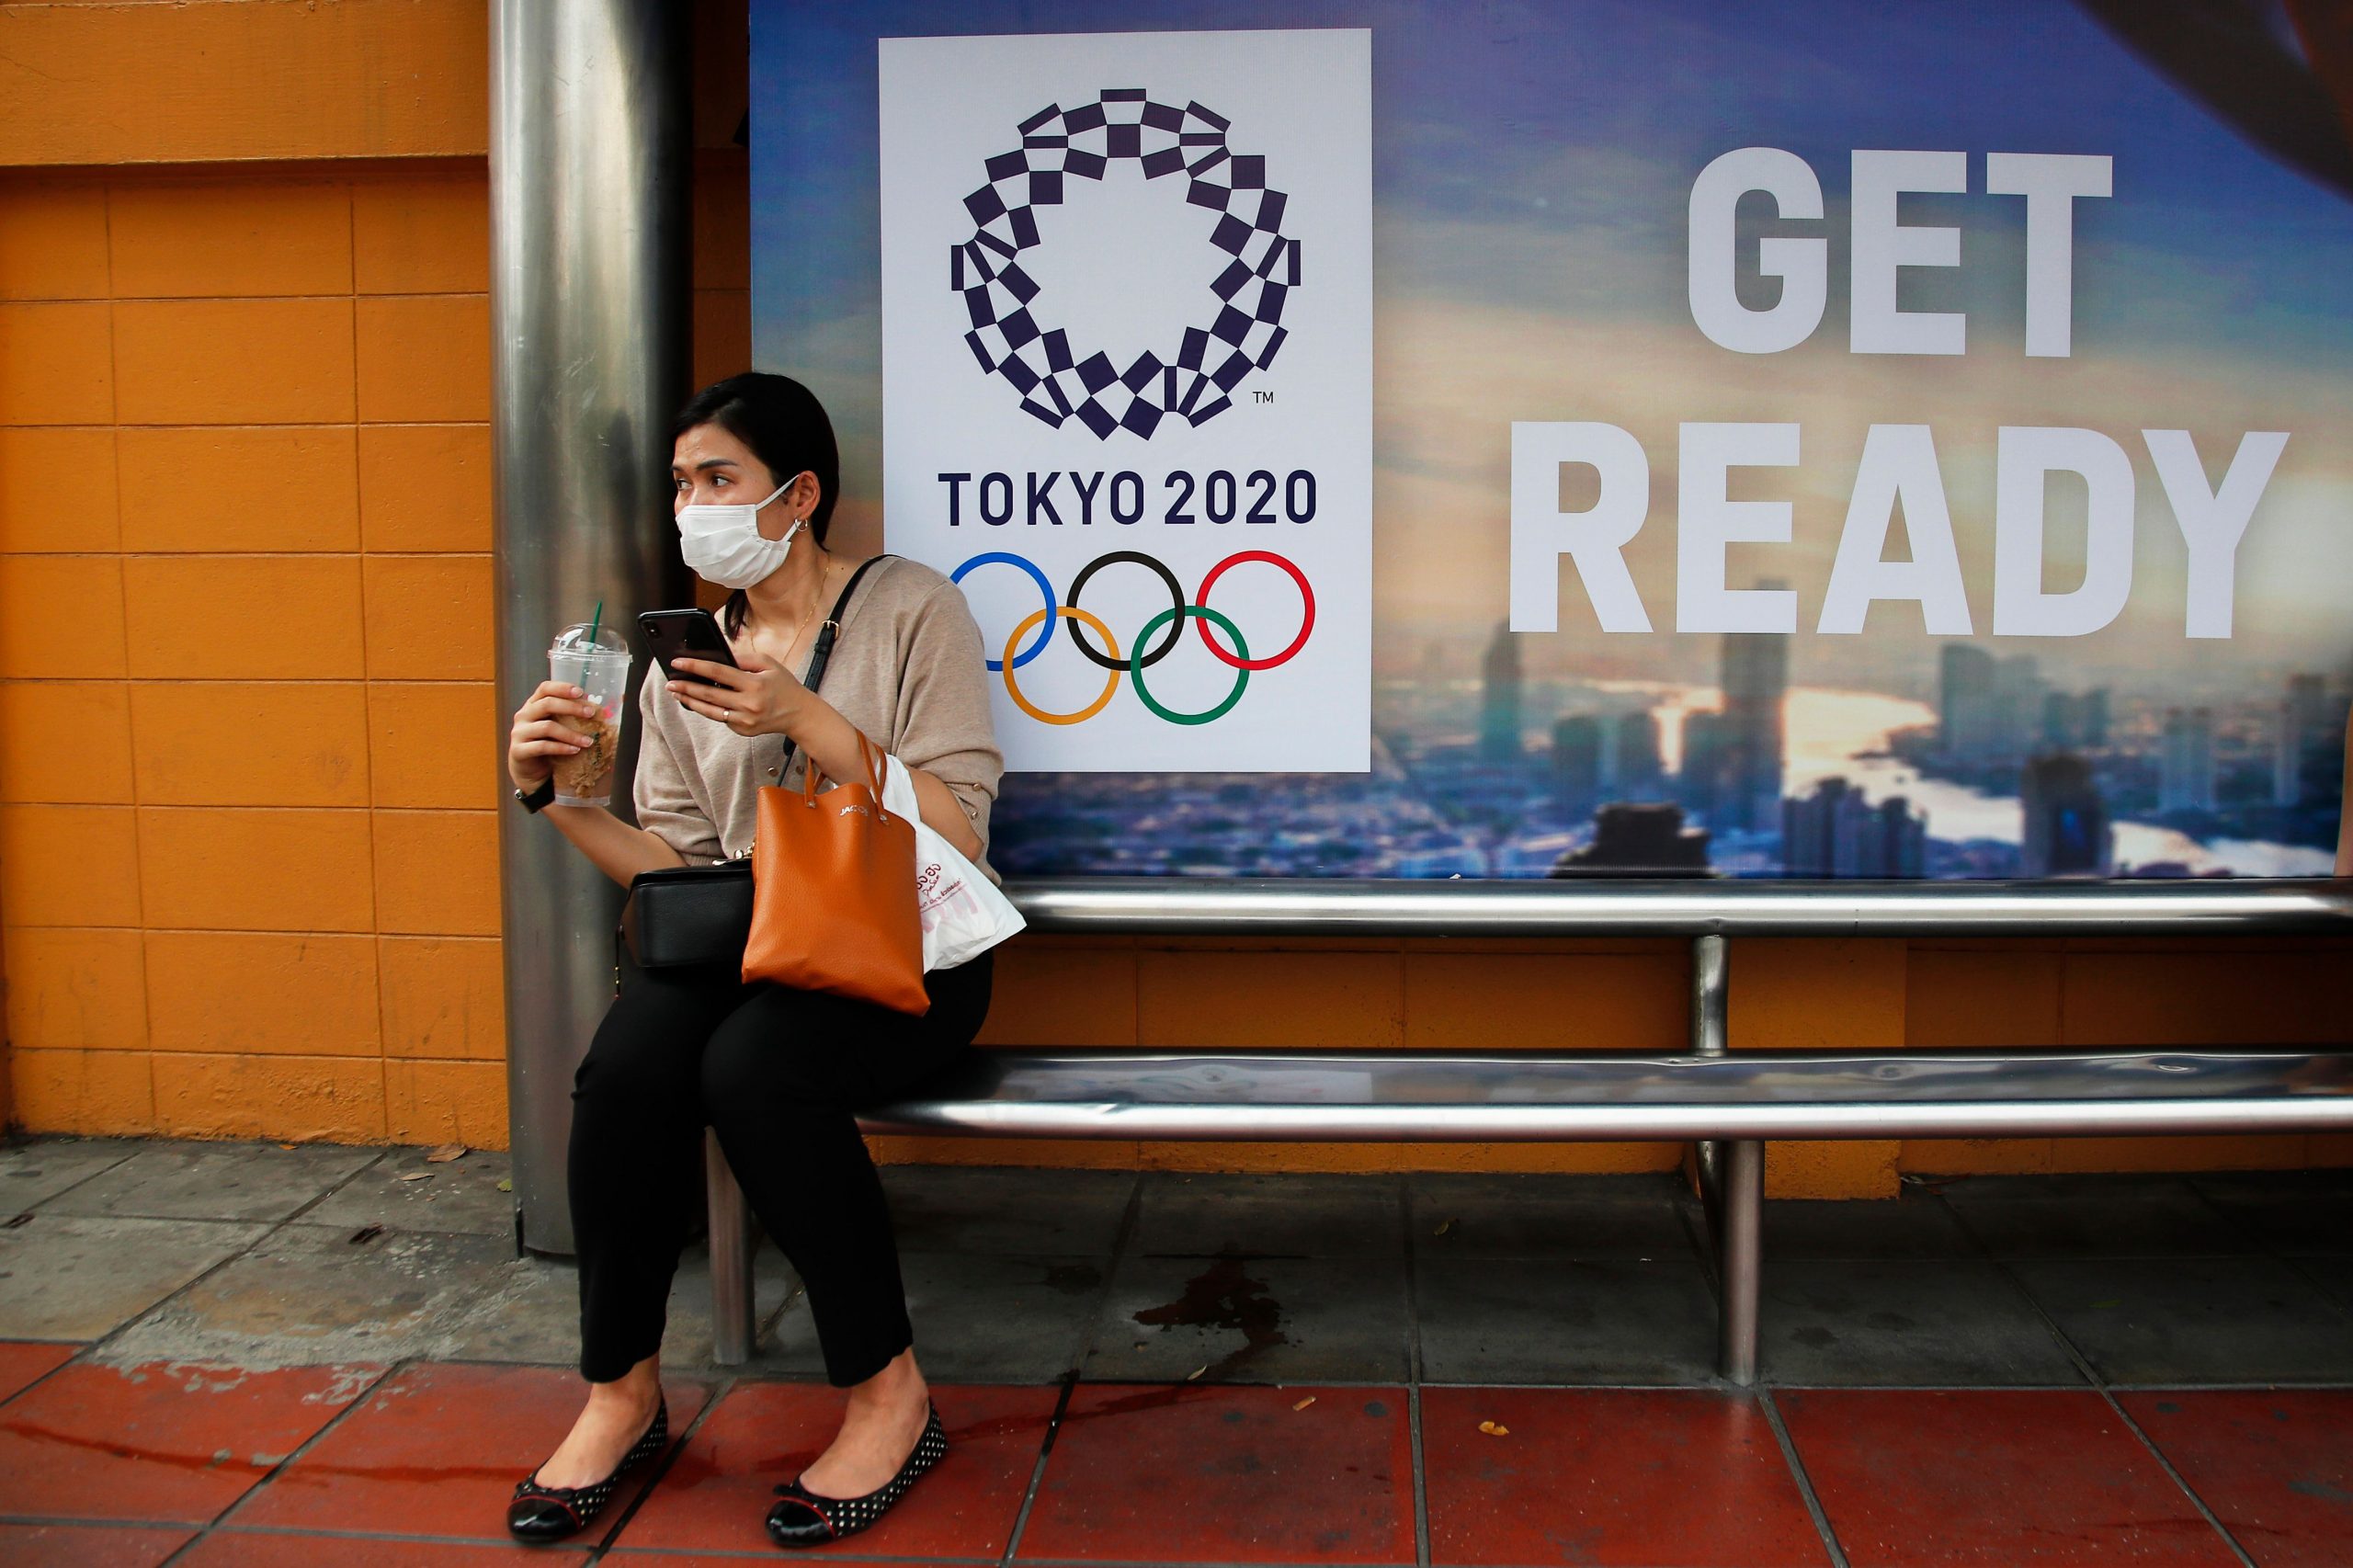 Senior IOC Official Says Final Tokyo 2020 Decision to be Made in Spring